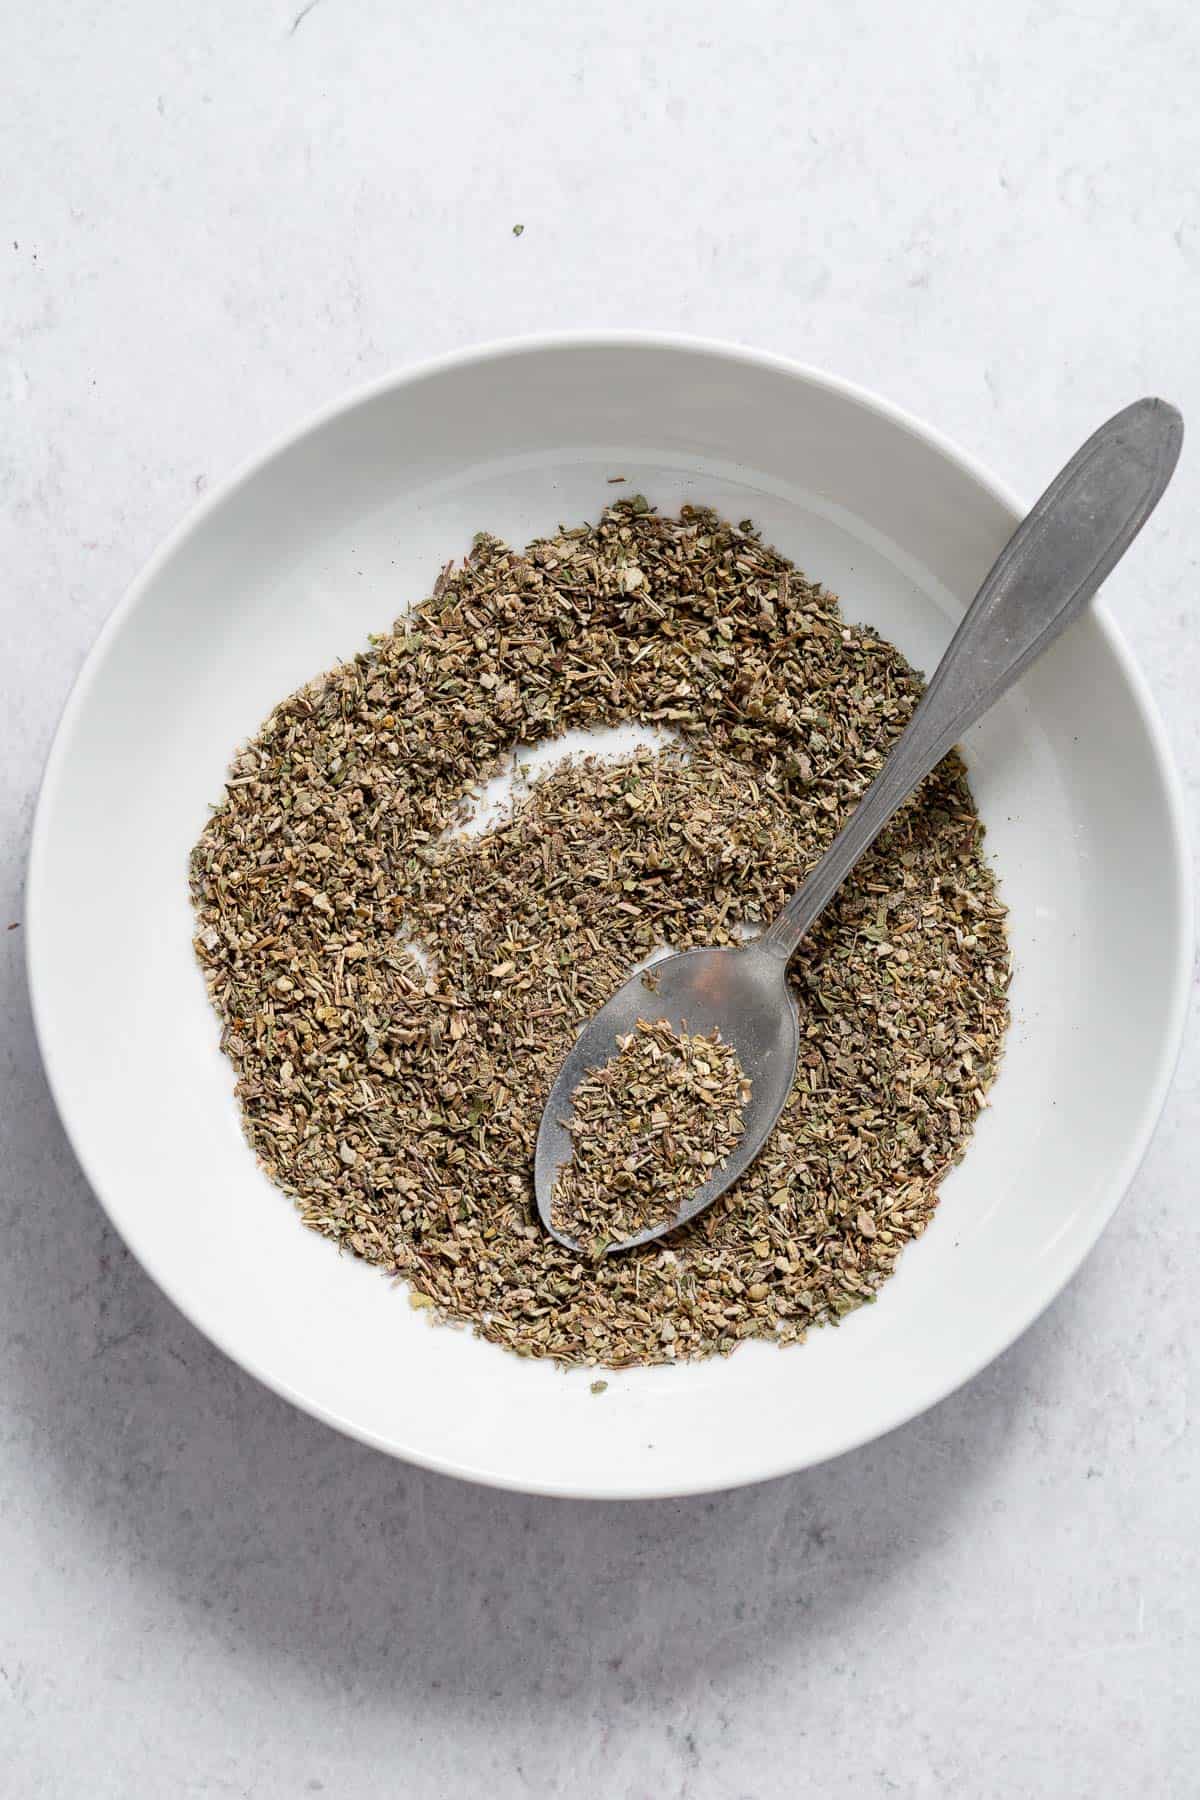 Overhead of poultry seasoning in a white bowl with a spoon.